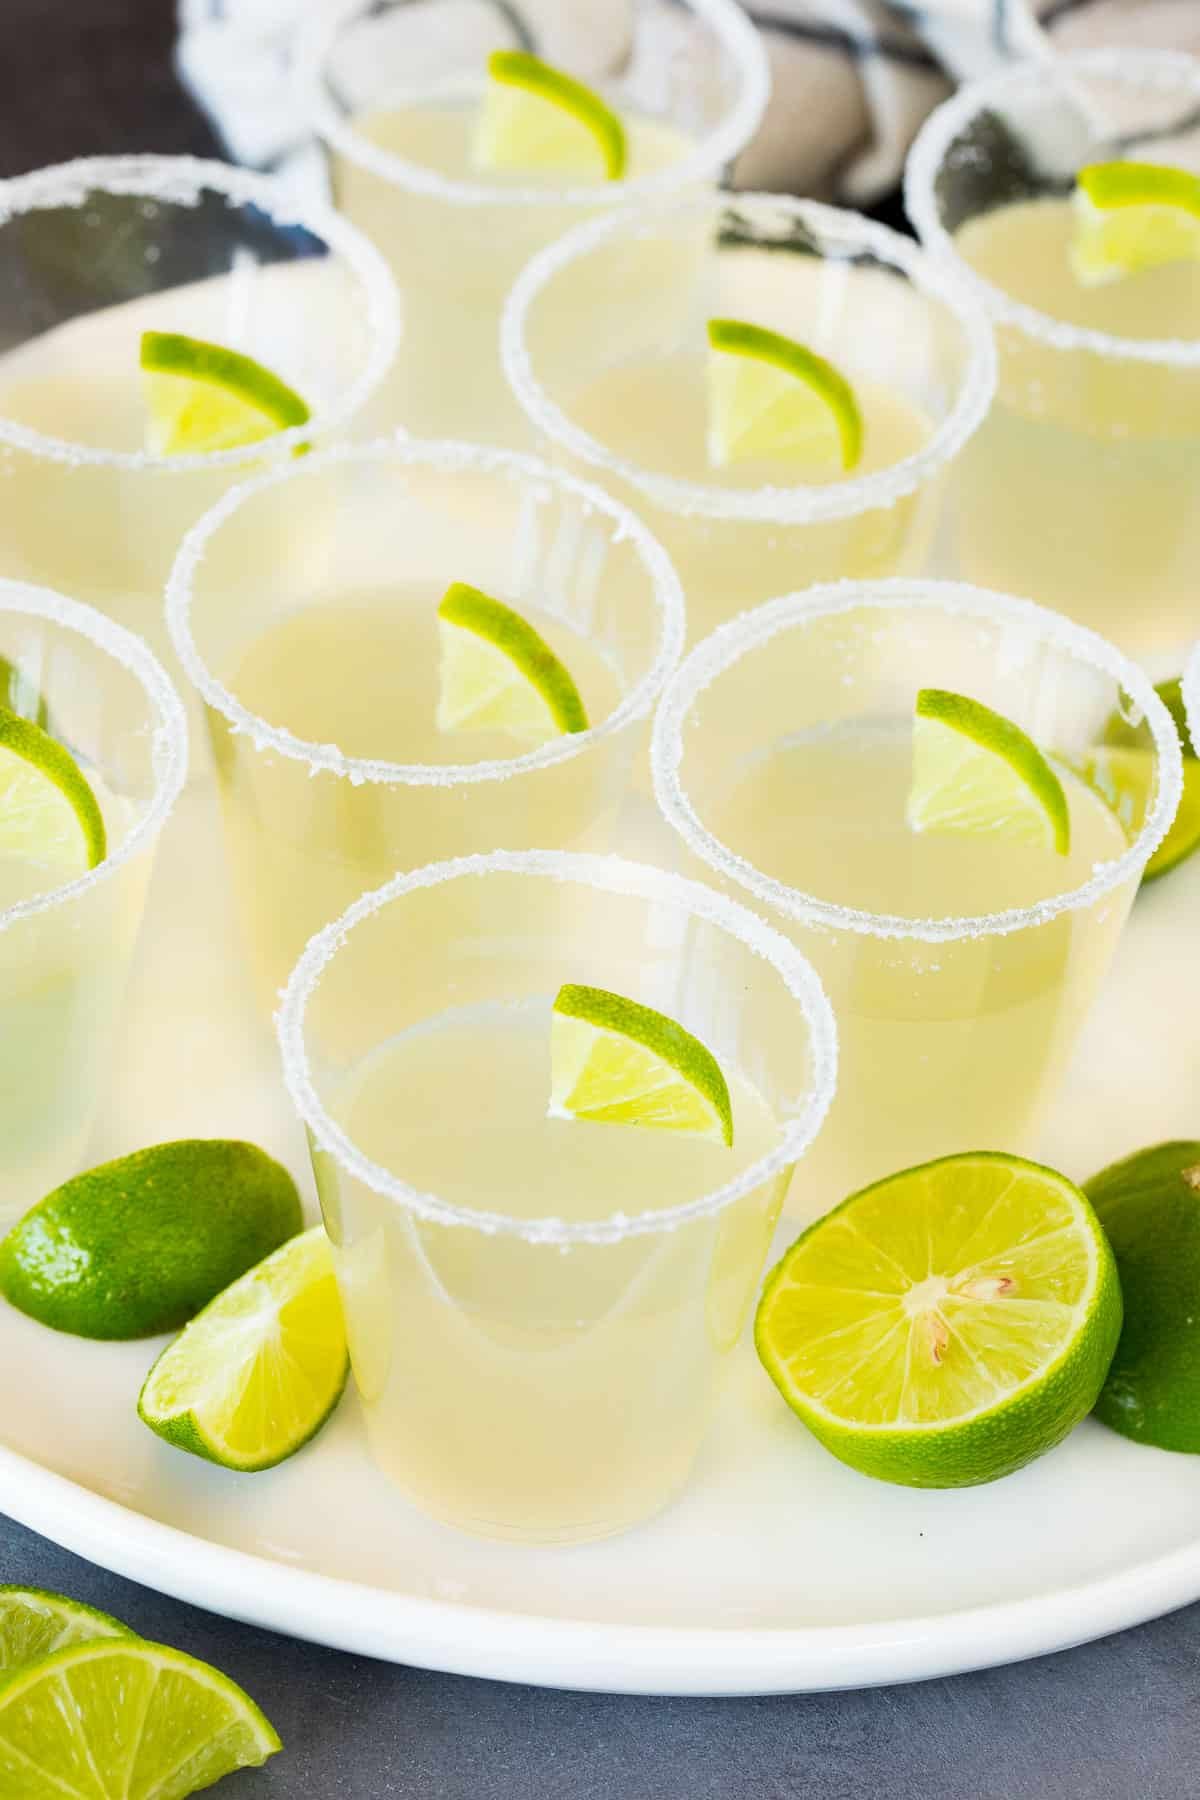 Margarita Jello shots on a plate garnished with limes.